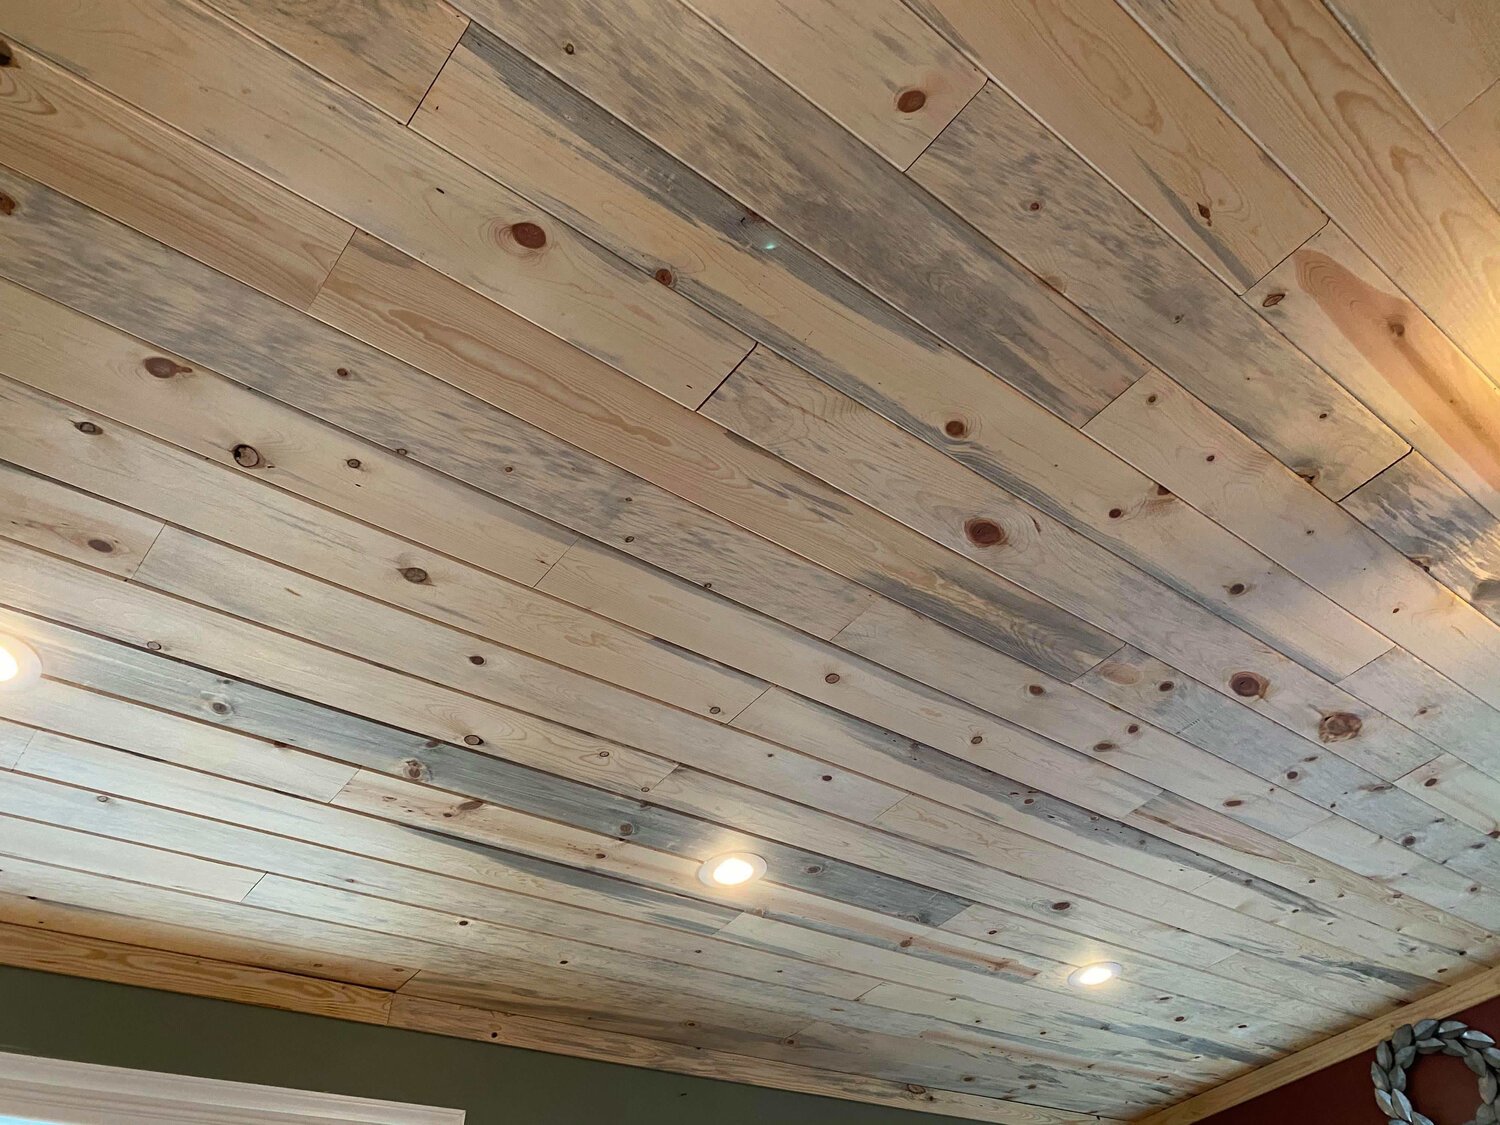   Full of creativity and outside-the-box ideas (we love the way you think Henry!), they decided to not only install the blue stain pine on their living room ceiling, but also on the floors. They even built a door from their&nbsp;waste pile.  